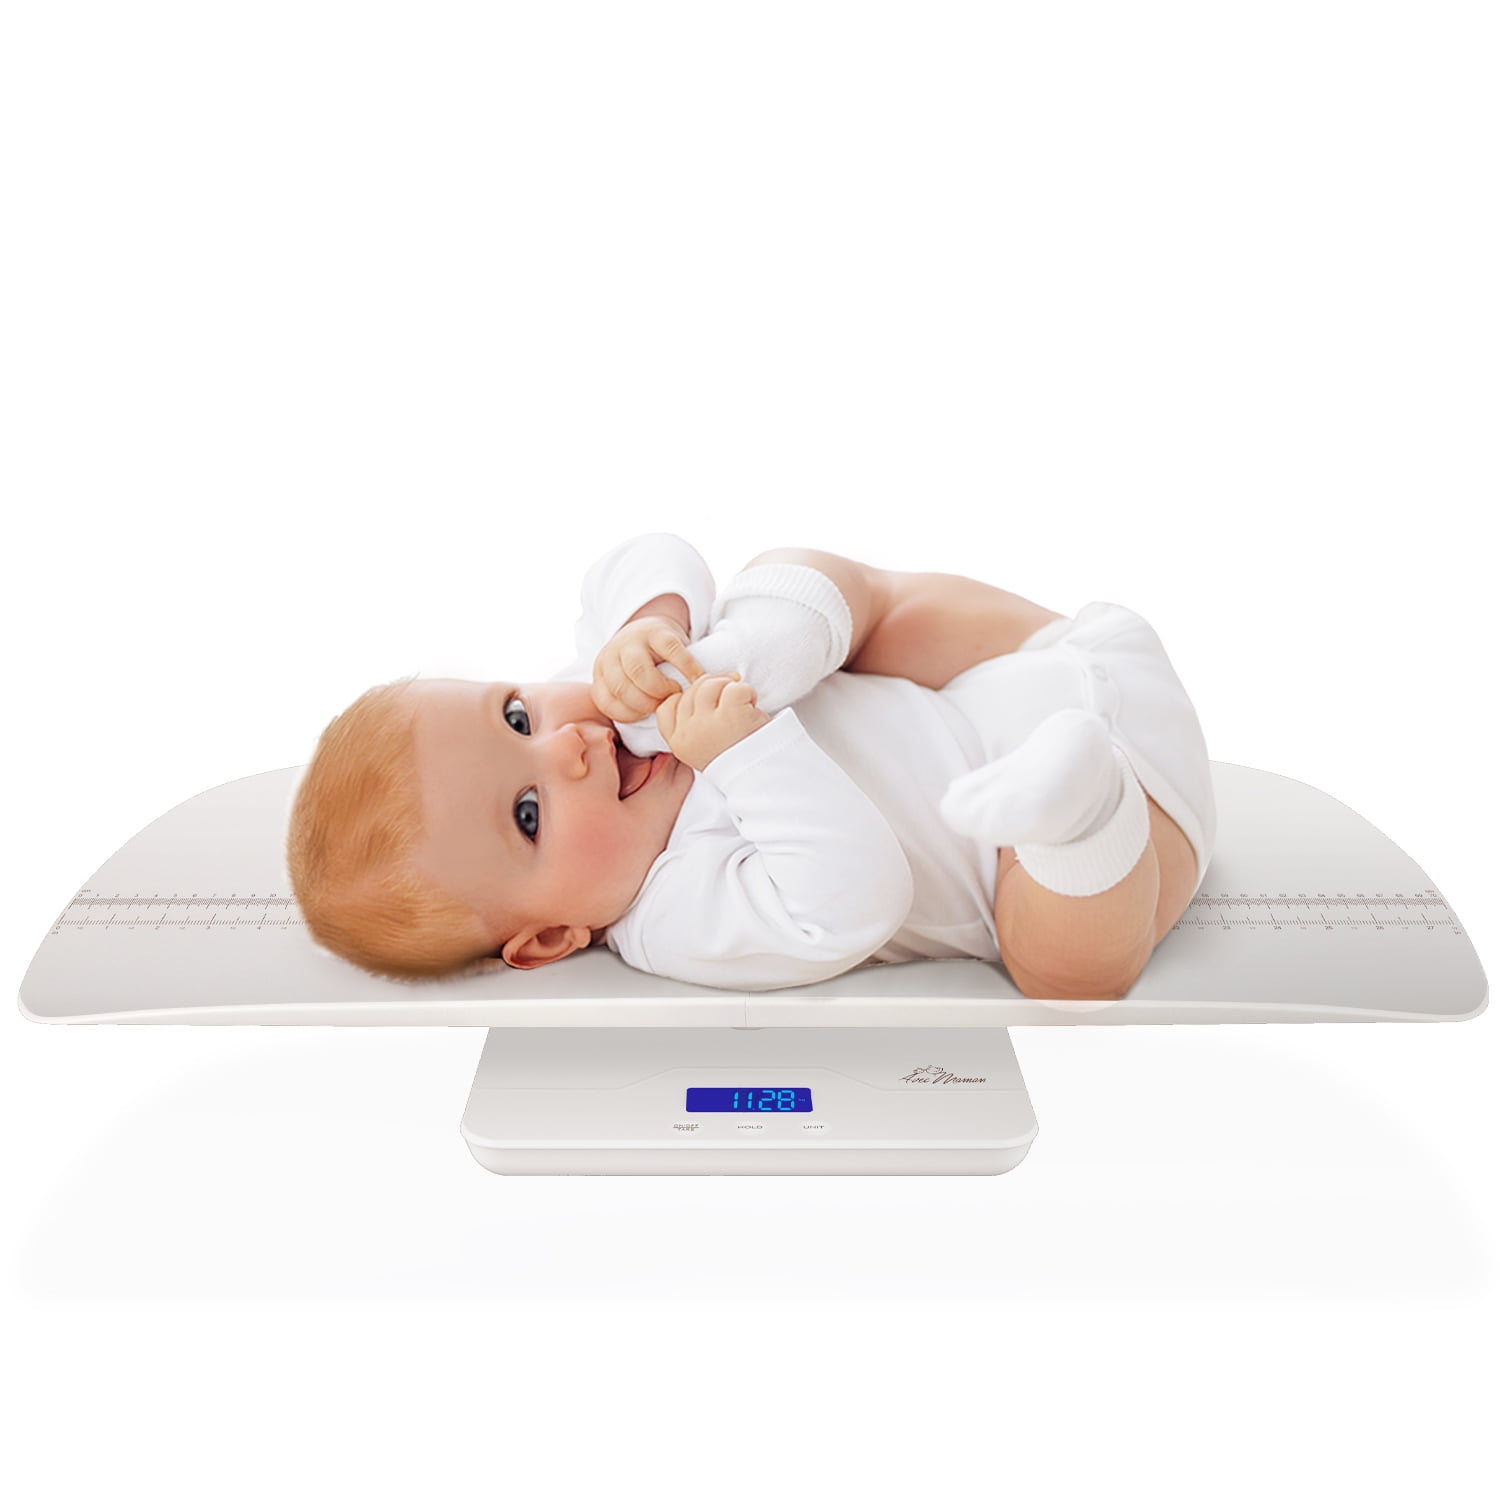 Adamson A50 Pet & Baby Scale, for Animals & Humans Up to 220 lb / 100 kg  (NEW)